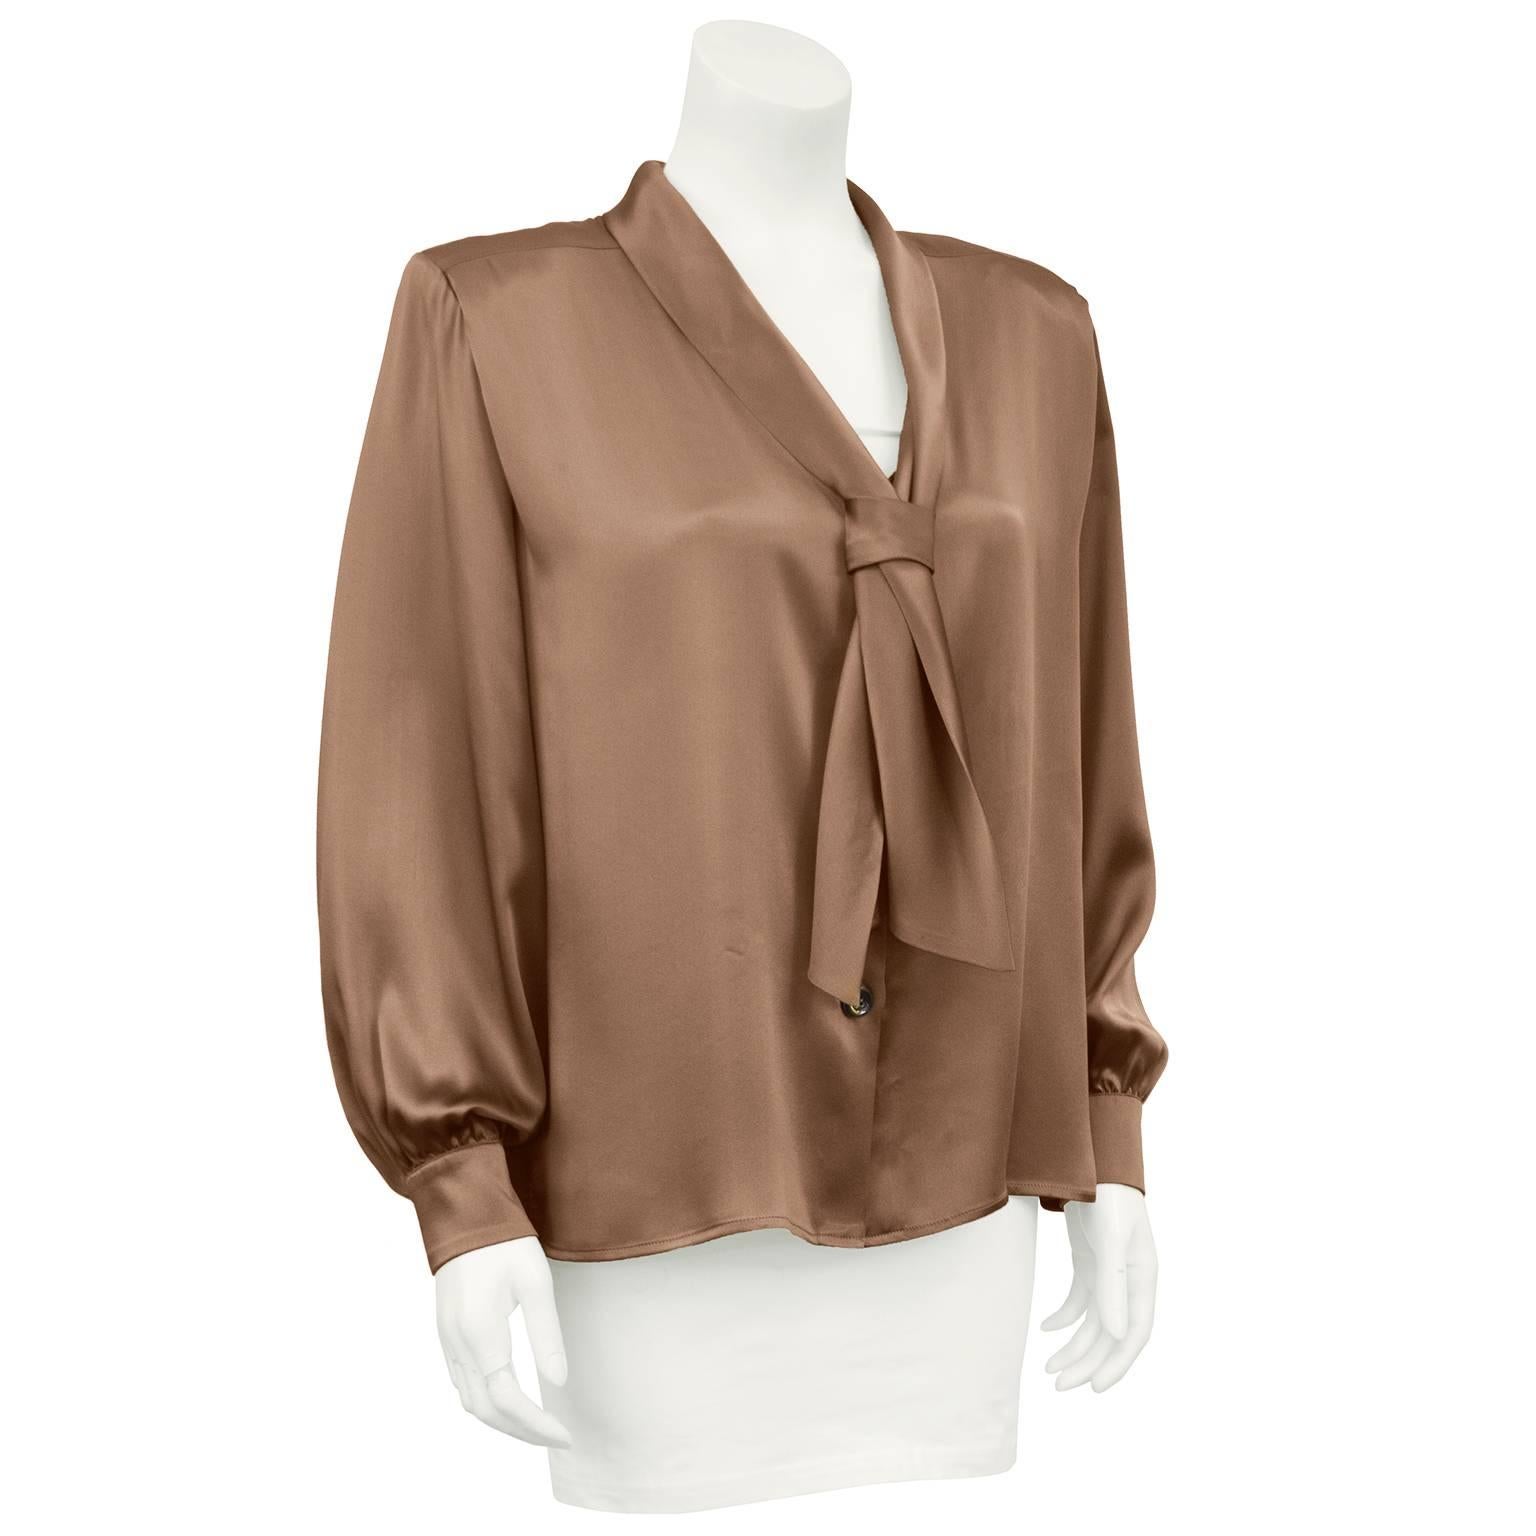 1980s Yves Saint Laurent champange silk bishop sleeve blouse. V neck with a tie at neckline. Right side of tie is tacked down and the left side just slips into the knot. Large shoulder pads can be removed easily. Excellent vintage condition. Marked